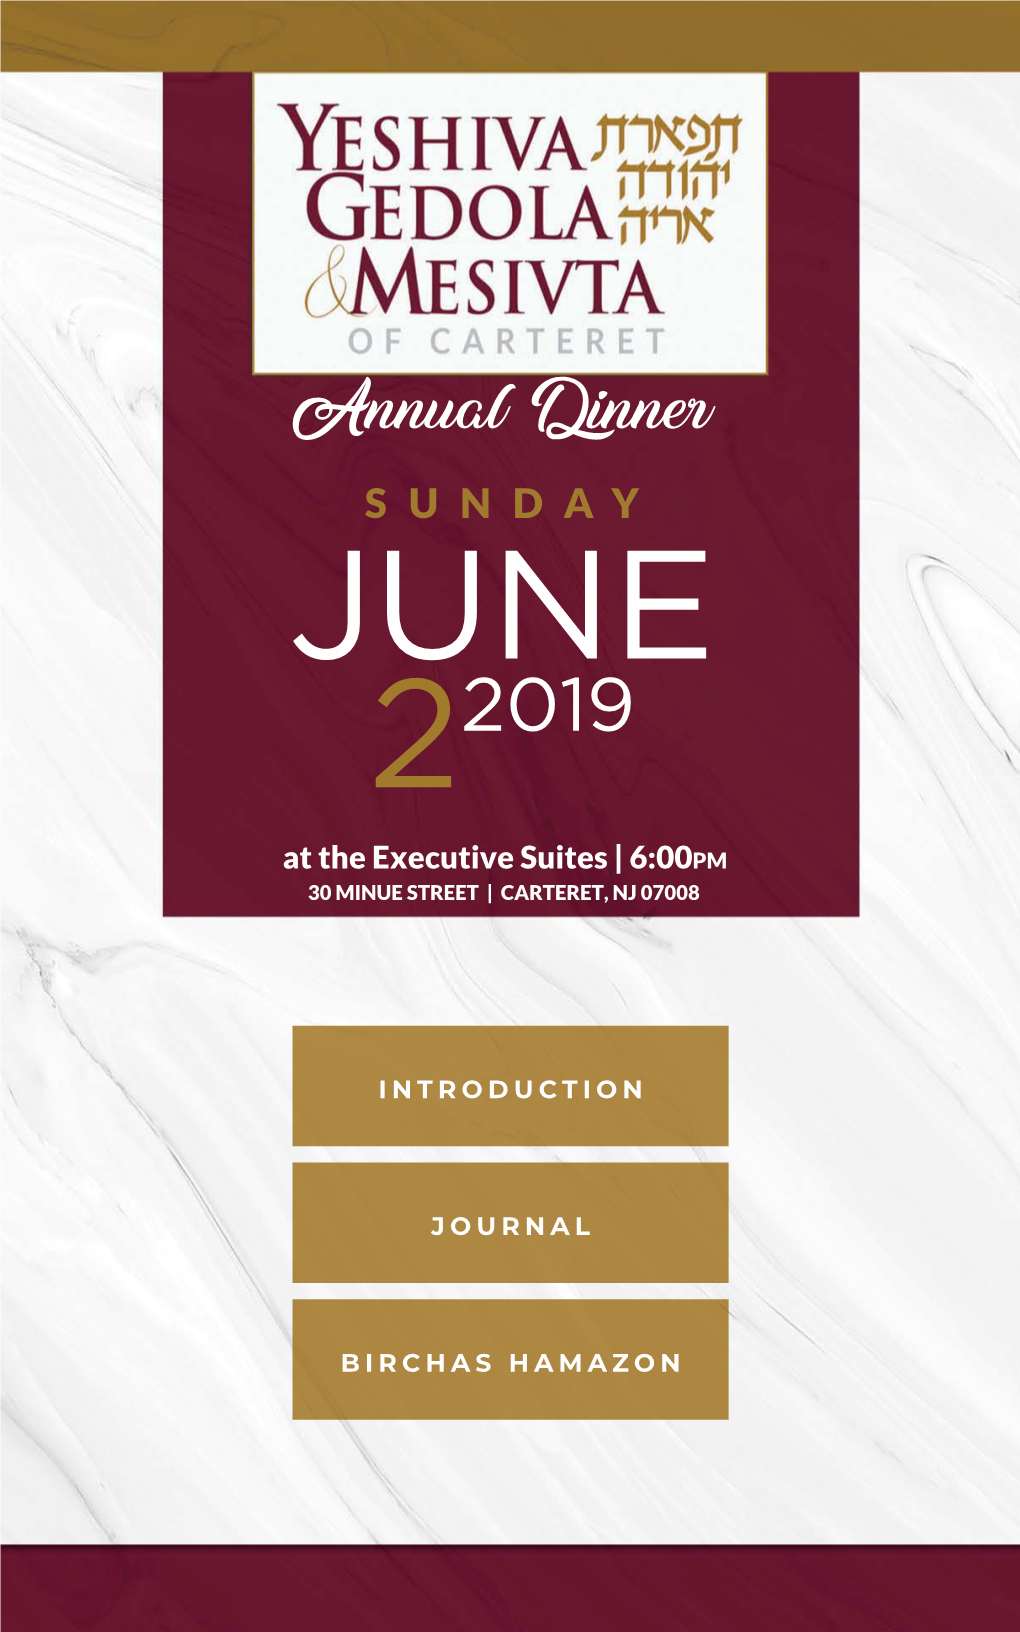 Annual Dinner S U N D a Y JUNE 22019 at the Executive Suites | 6:00Pm 30 MINUE STREET | CARTERET, NJ 07008